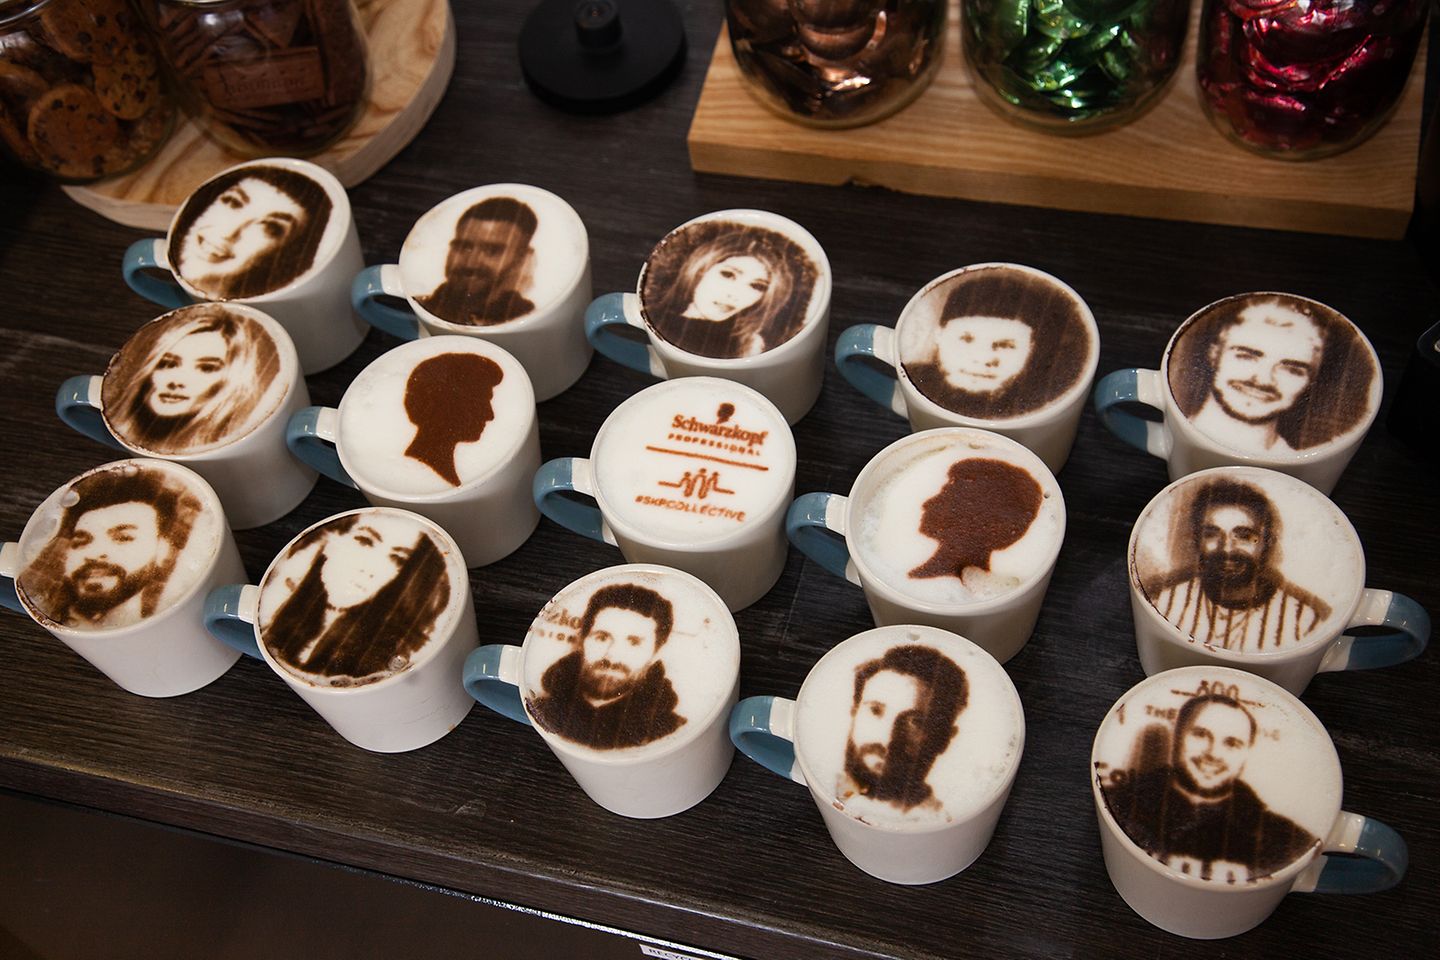 SKPCollective team portraits made with latte art